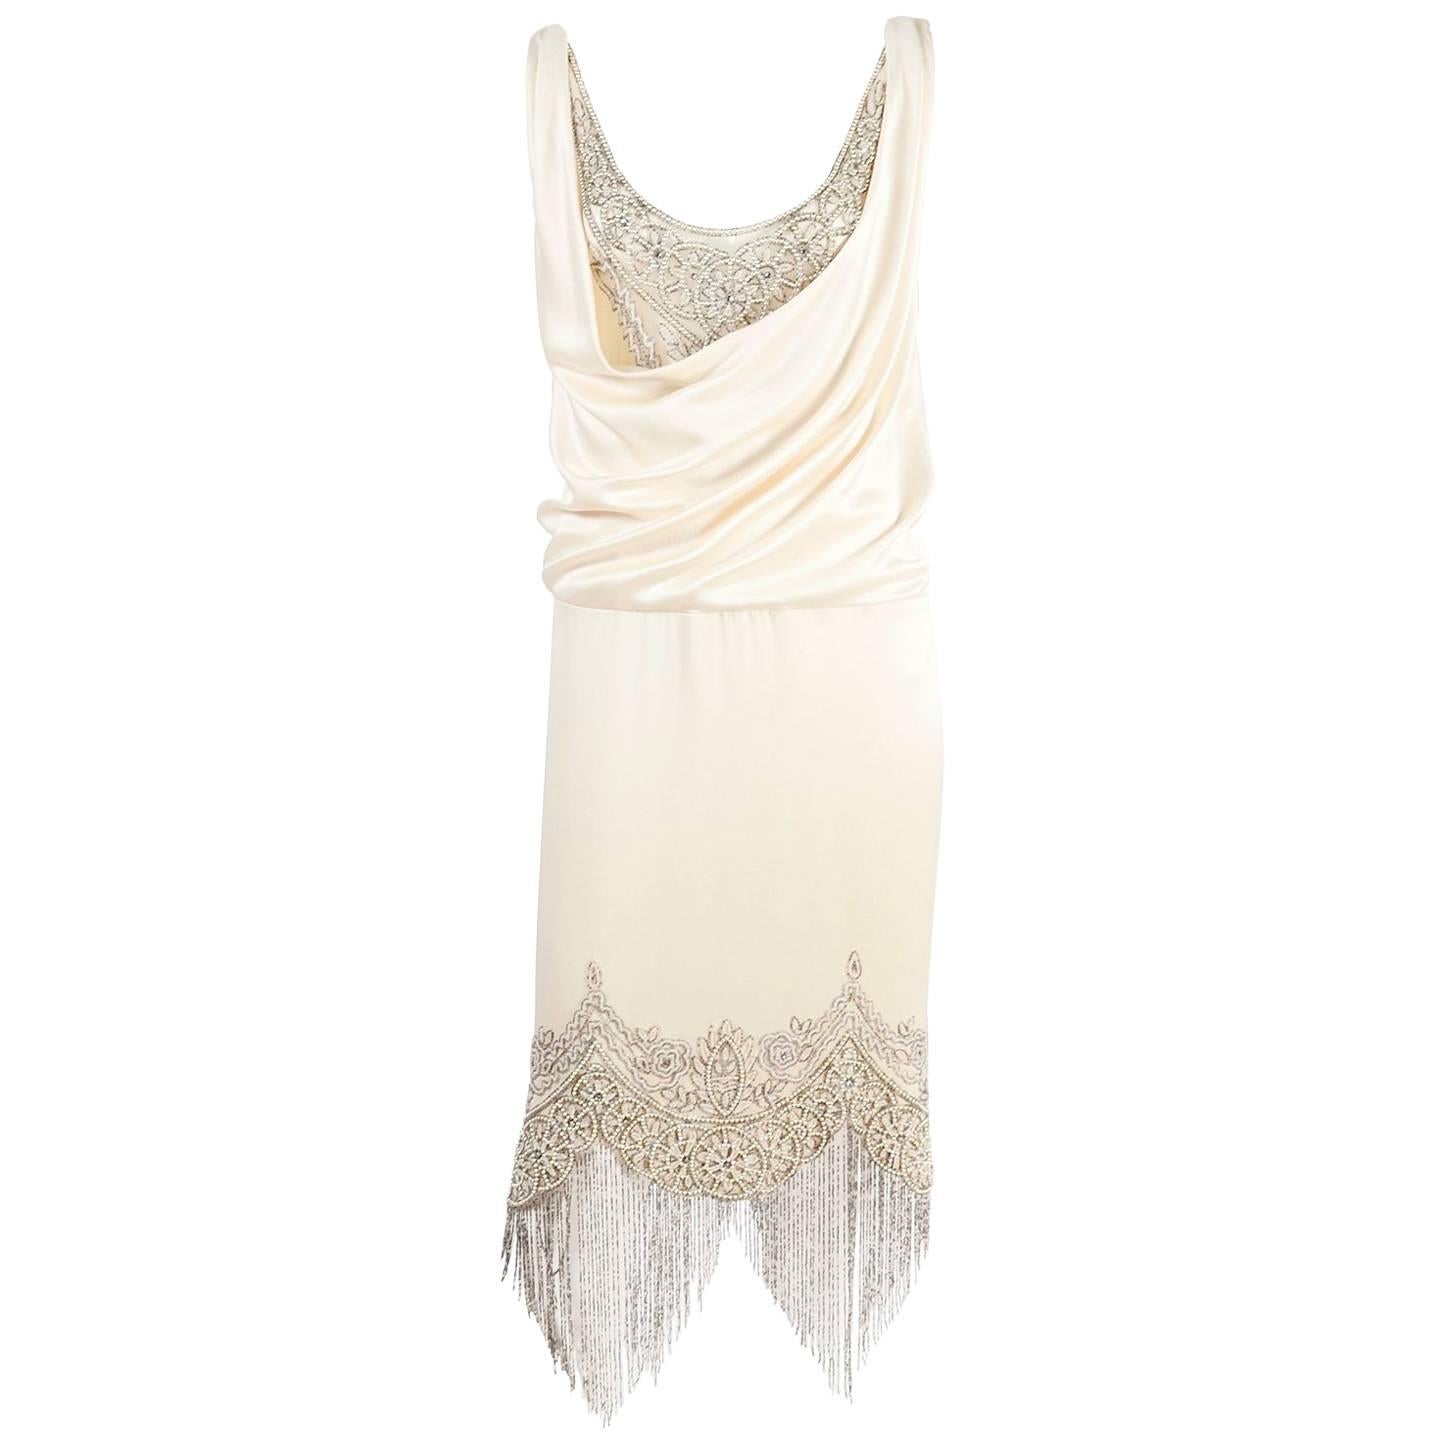 Alexander McQueen Ivory Silk Embroidered Beaded Dress with Fringe, 2007 